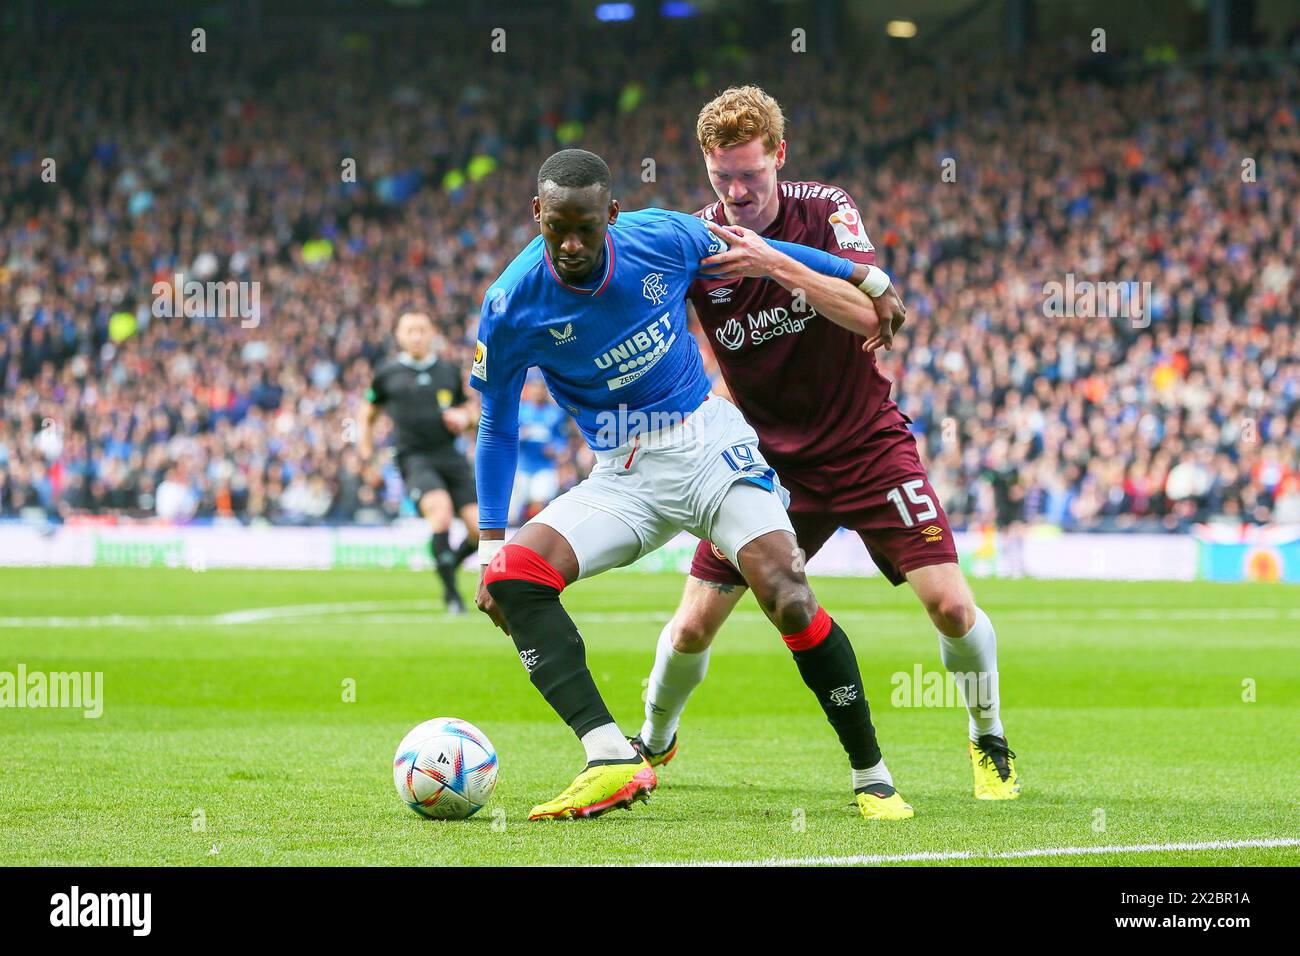 Glasgow, UK. 21st Apr, 2024. Rangers play Heart of Midlothian at Hampden Park football stadium, Glasgow, Scotland, UK in a semi final of the Scottish Cup. The winner of this game will play Celtic FC in the final. Credit: Findlay/Alamy Live News Stock Photo